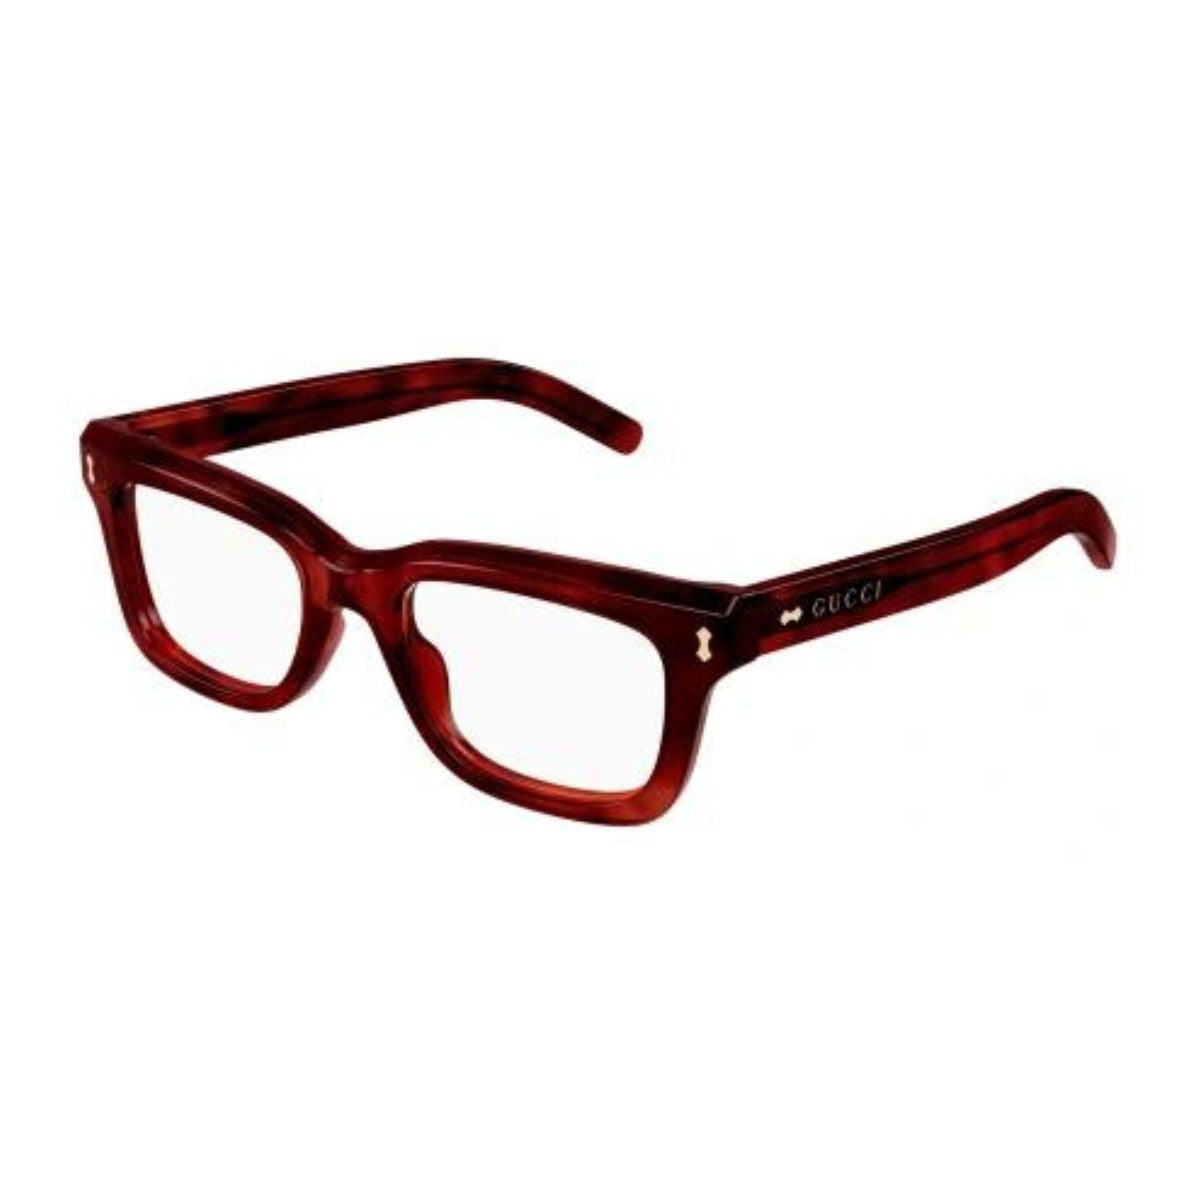 "buy Gucci GG1522O 007 spactacle frame for women's at optorium"